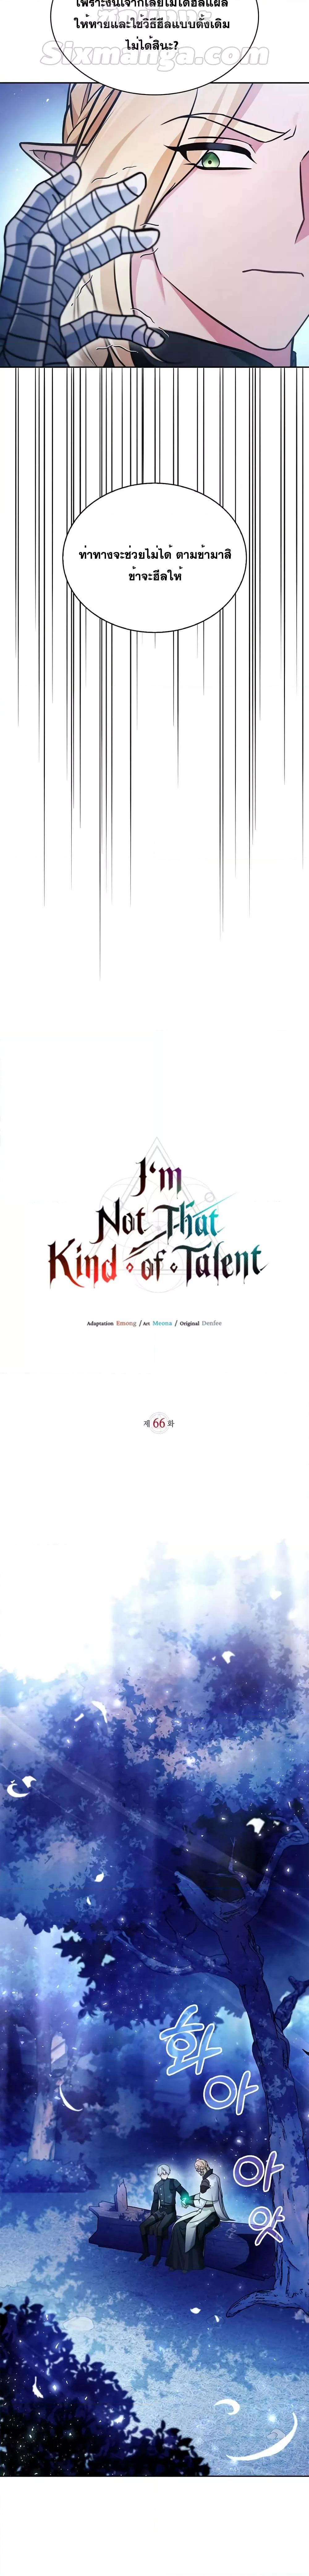 I’m Not That Kind of Talent 66 15